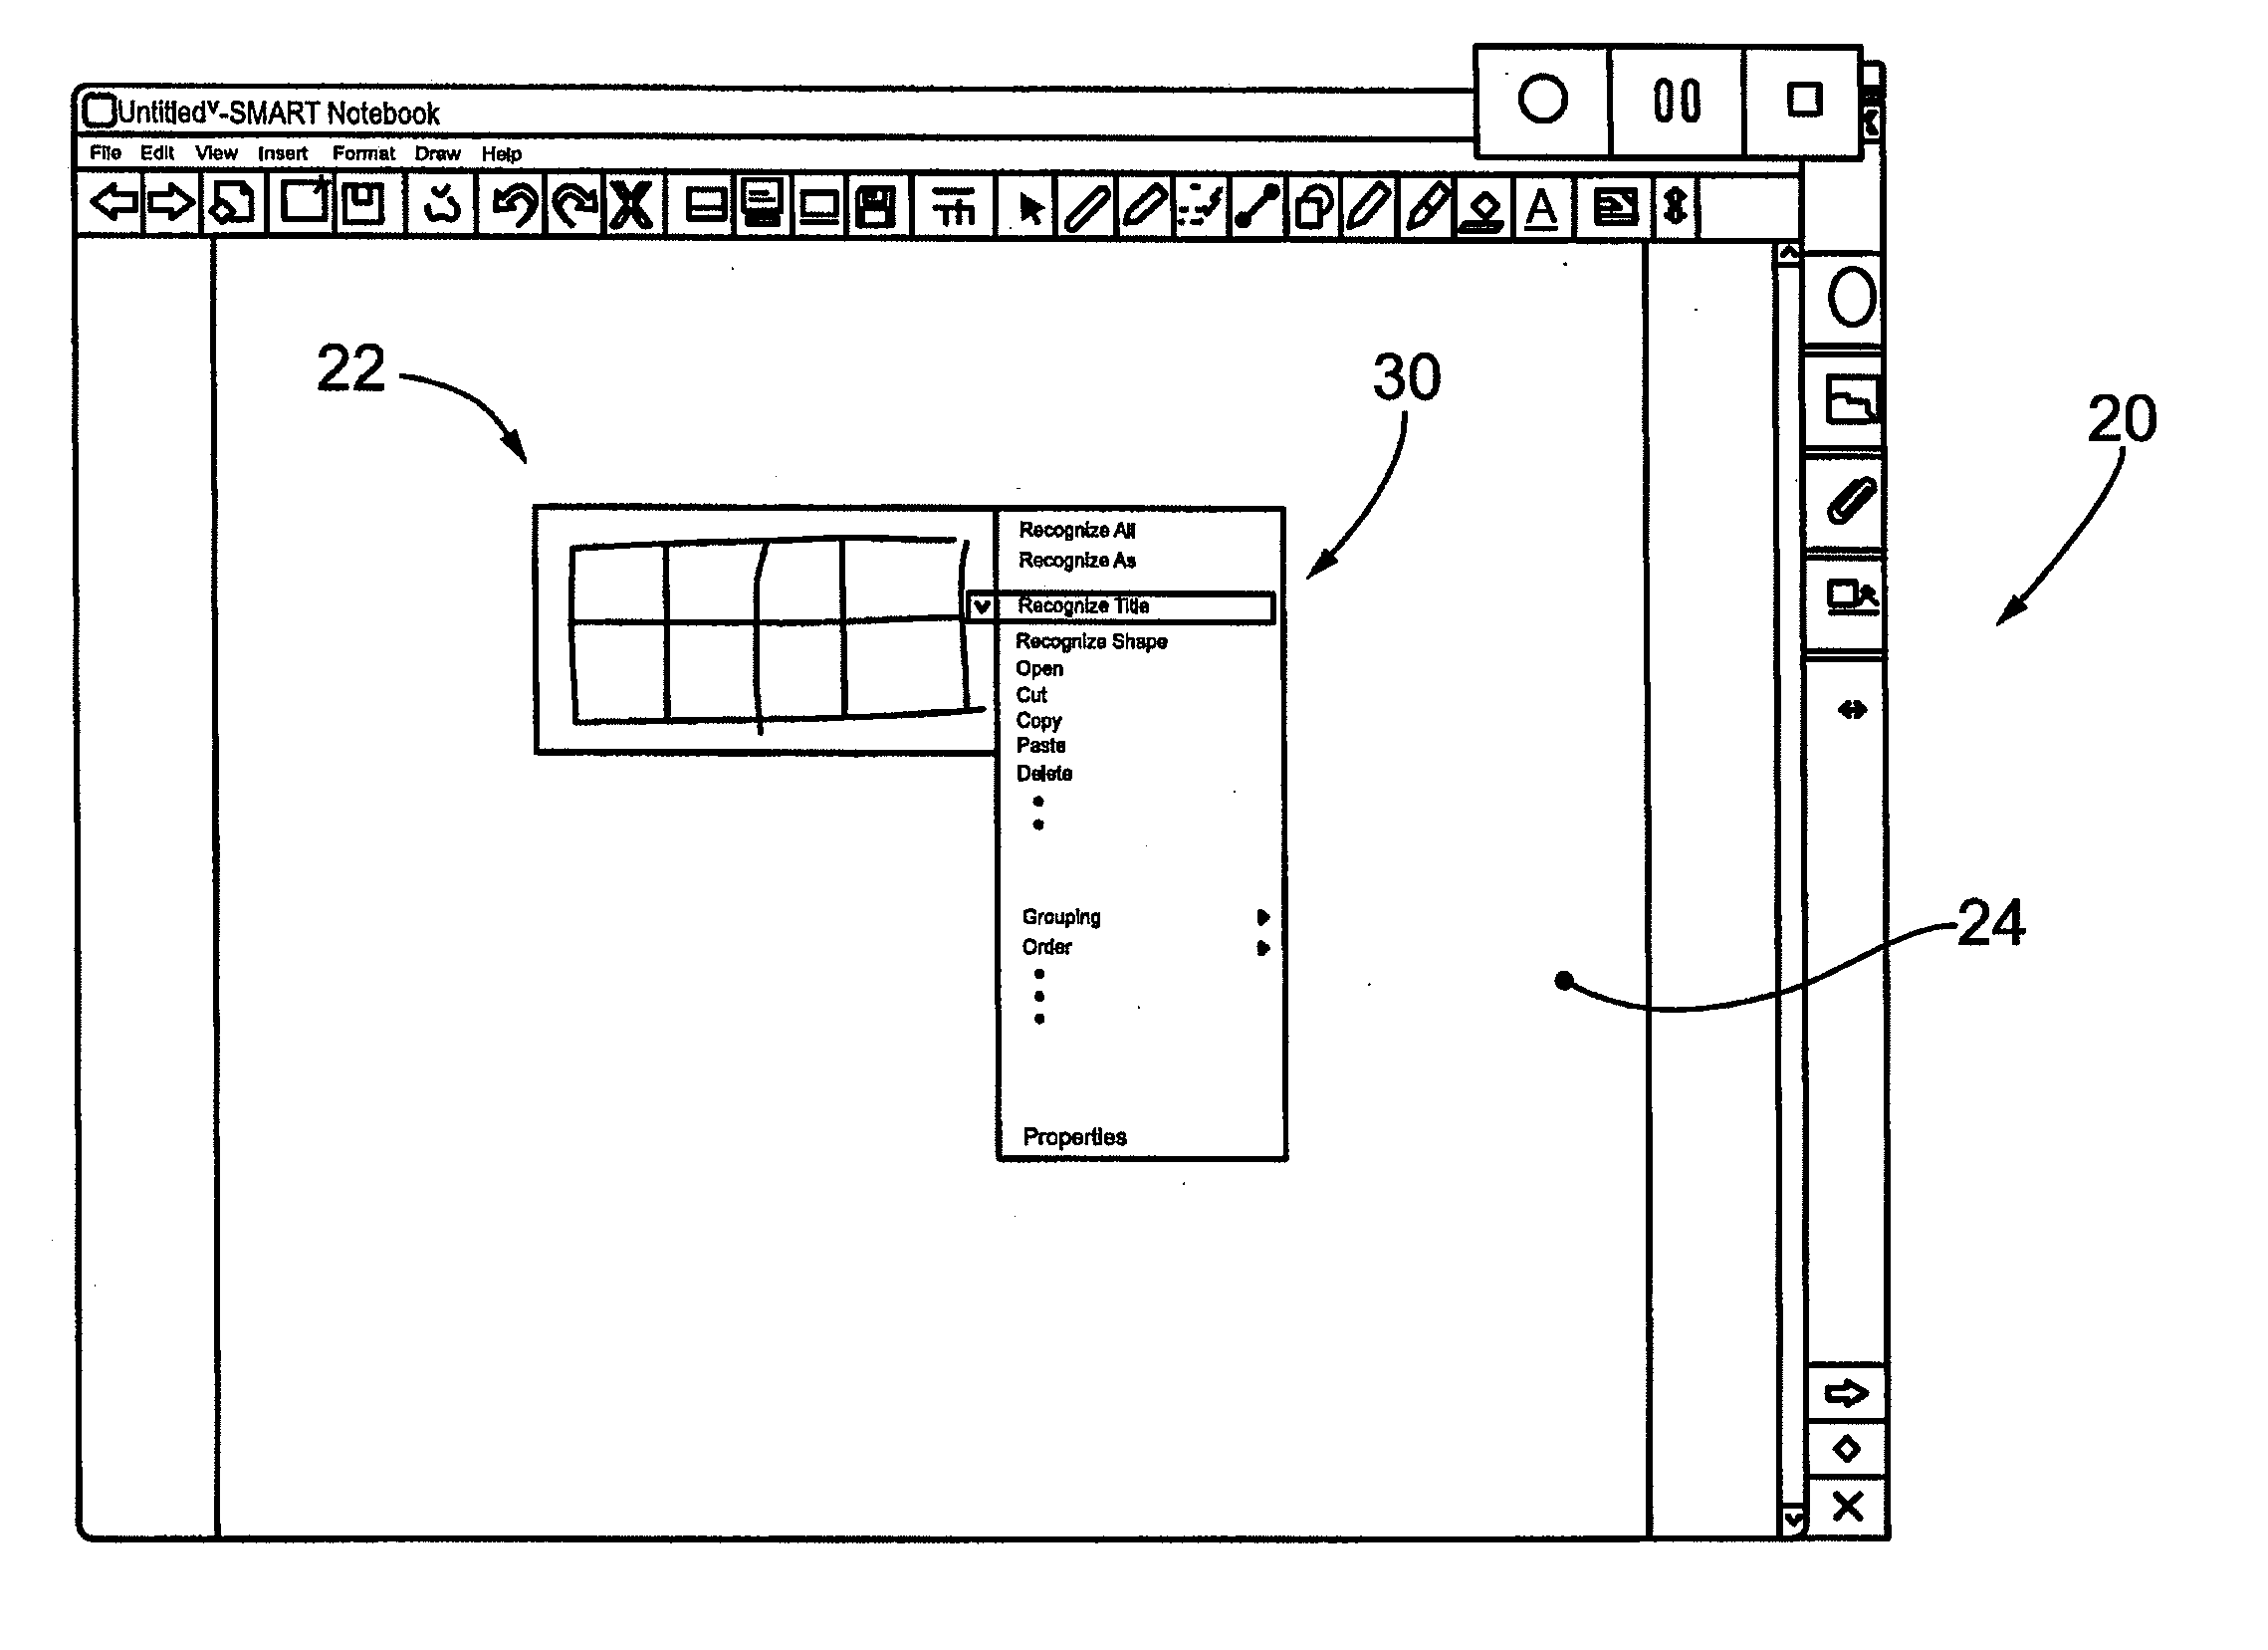 Method And Tool For Recognizing A Hand-Drawn Table